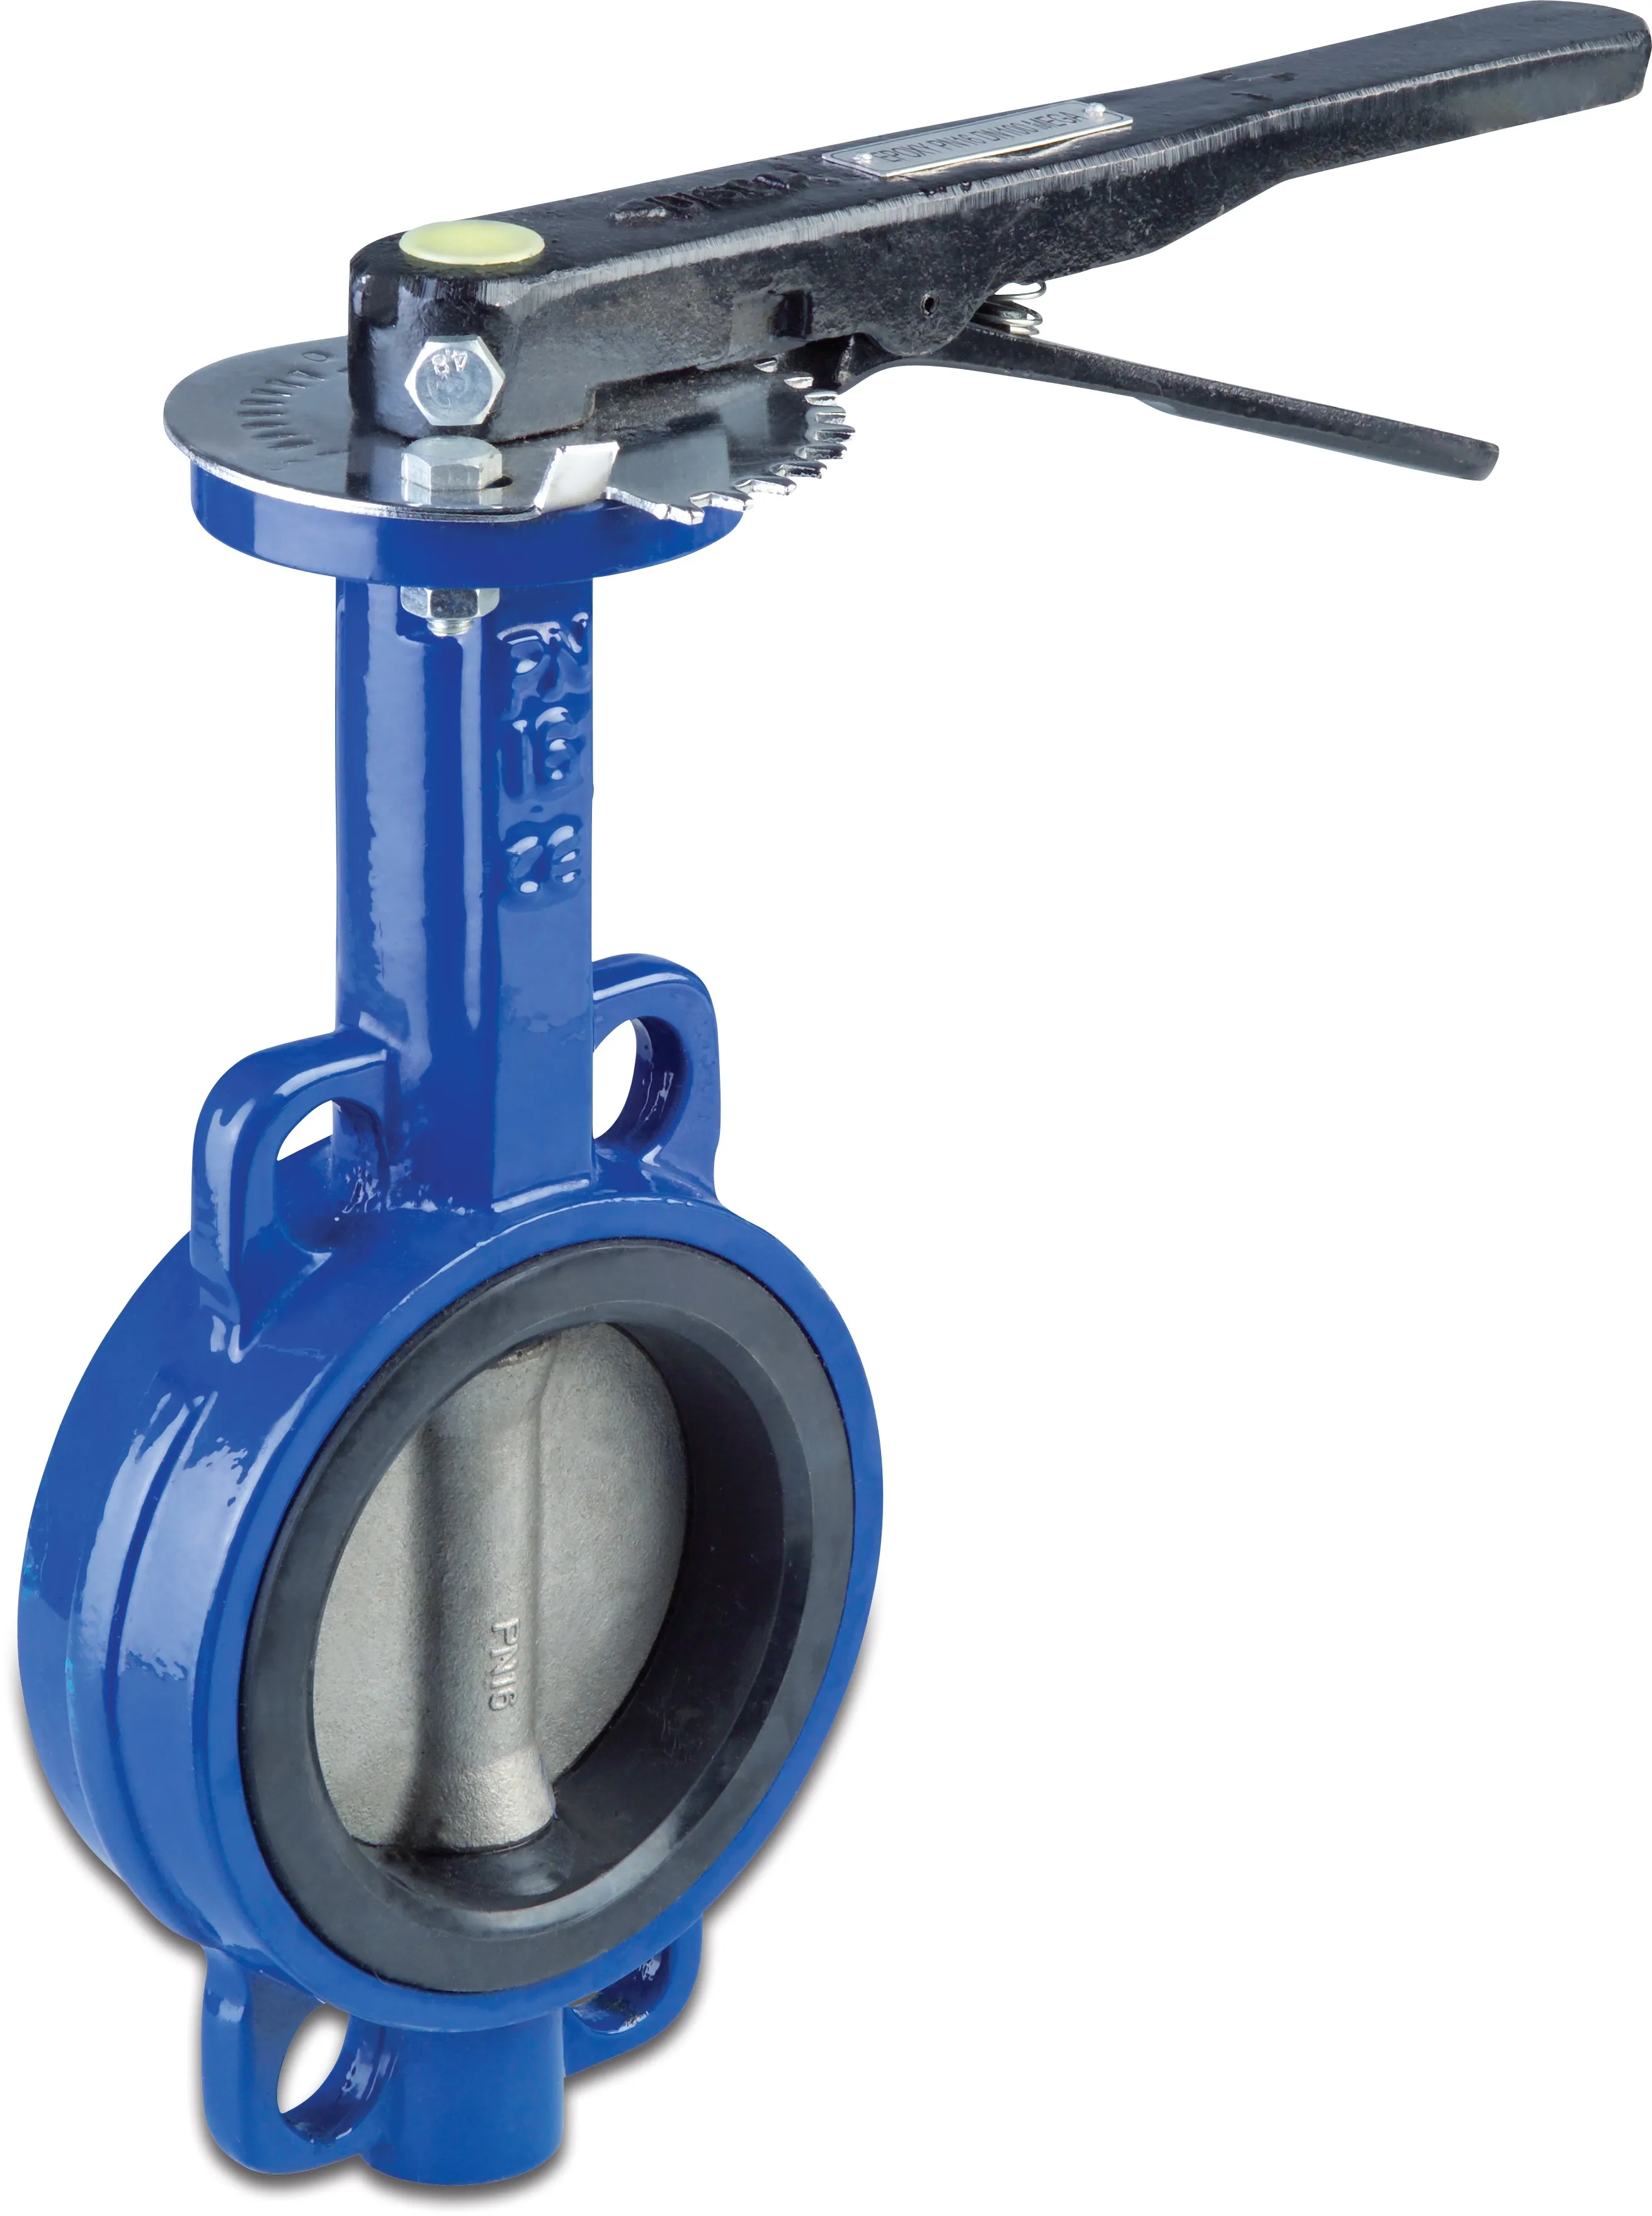 Profec Butterfly valve ductile iron (GGG40) epoxy coating DN50 flange 10bar blue PN6/10/16 type 601 disc stainless steel 316